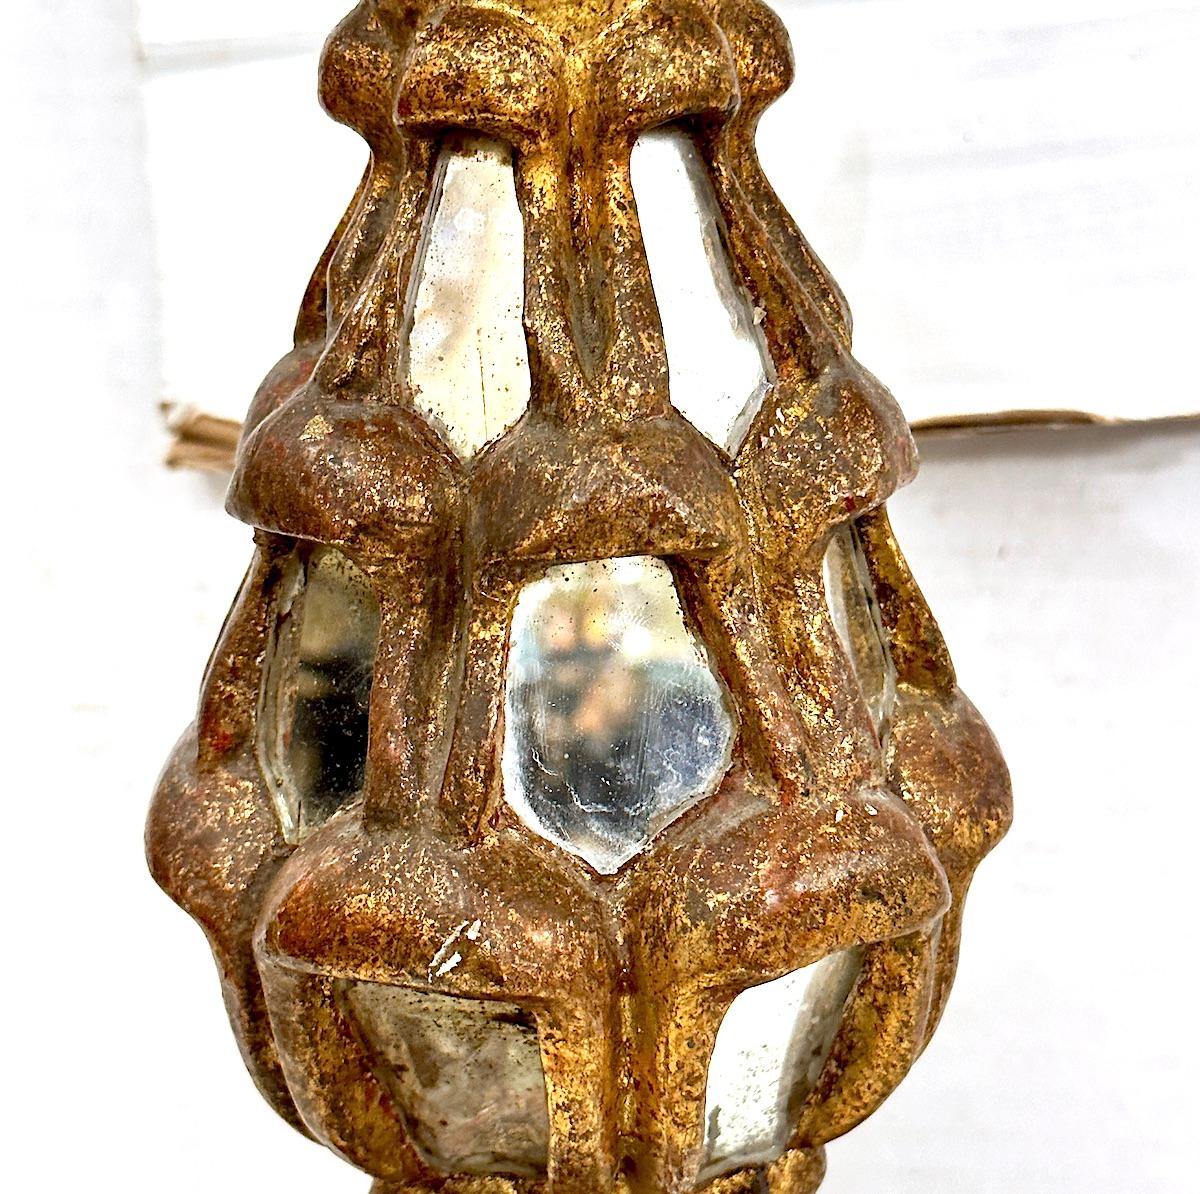 Early 20th Century Antique Candlesitck Lamp For Sale